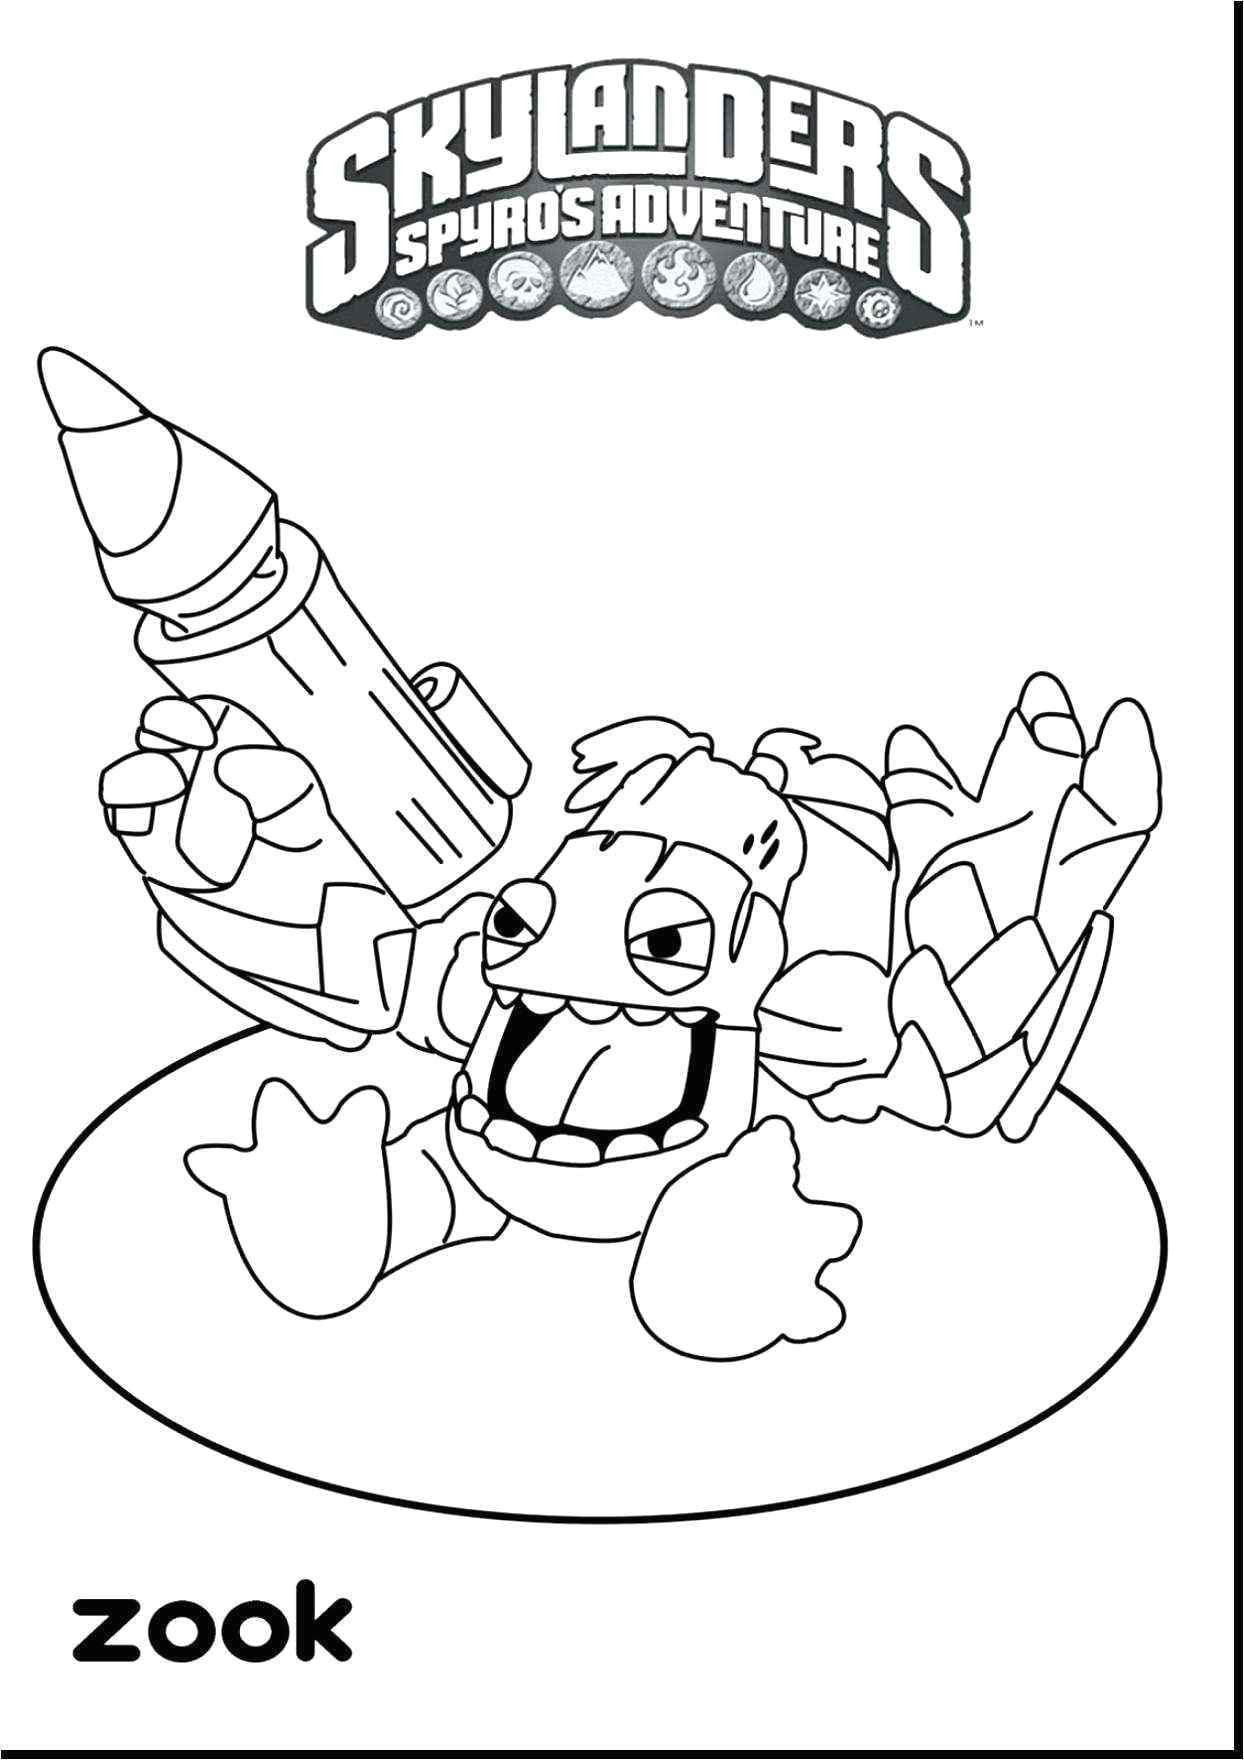 Drawing Quizzes Best Of United States Air force Coloring Pages C Trade Me